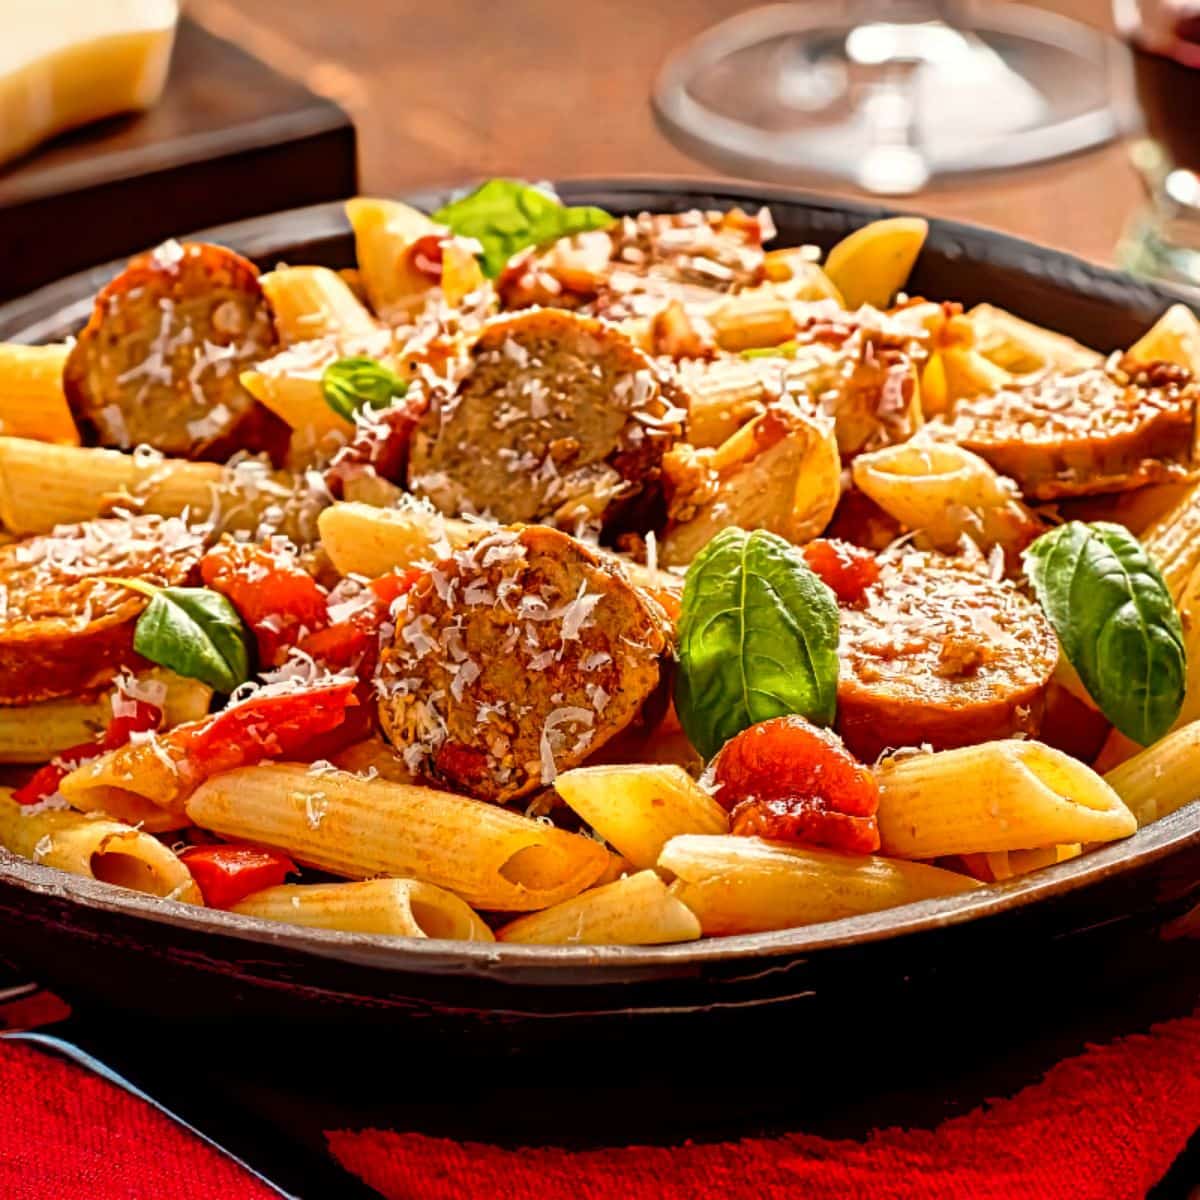 6. Baked Penne Pasta with Italian Sausage - recipes for Italian Sausage with pasta